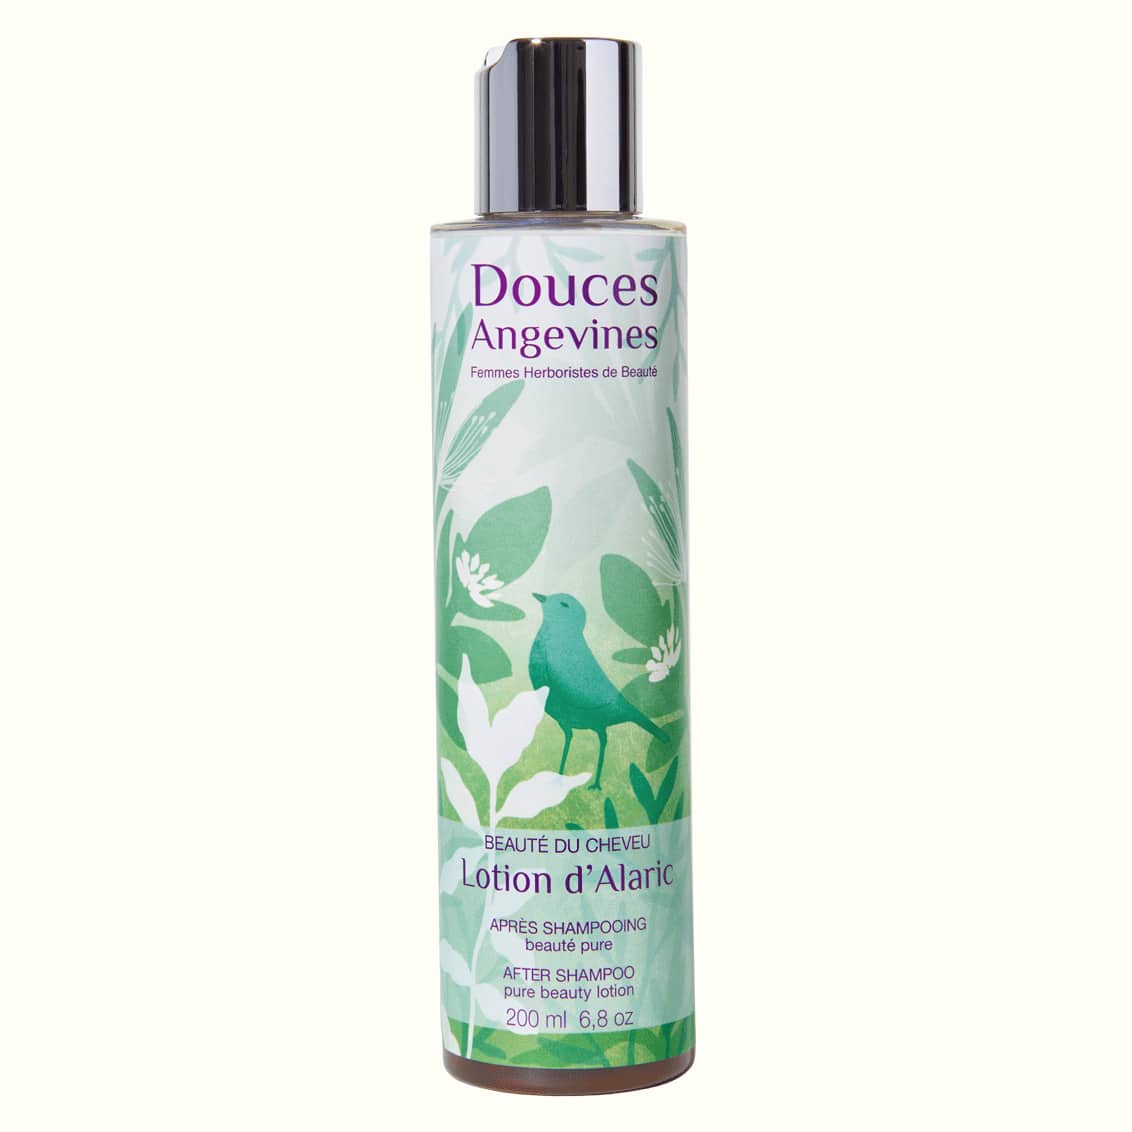 Lotion d'Alaric after organic shampoo - Douces Angevines